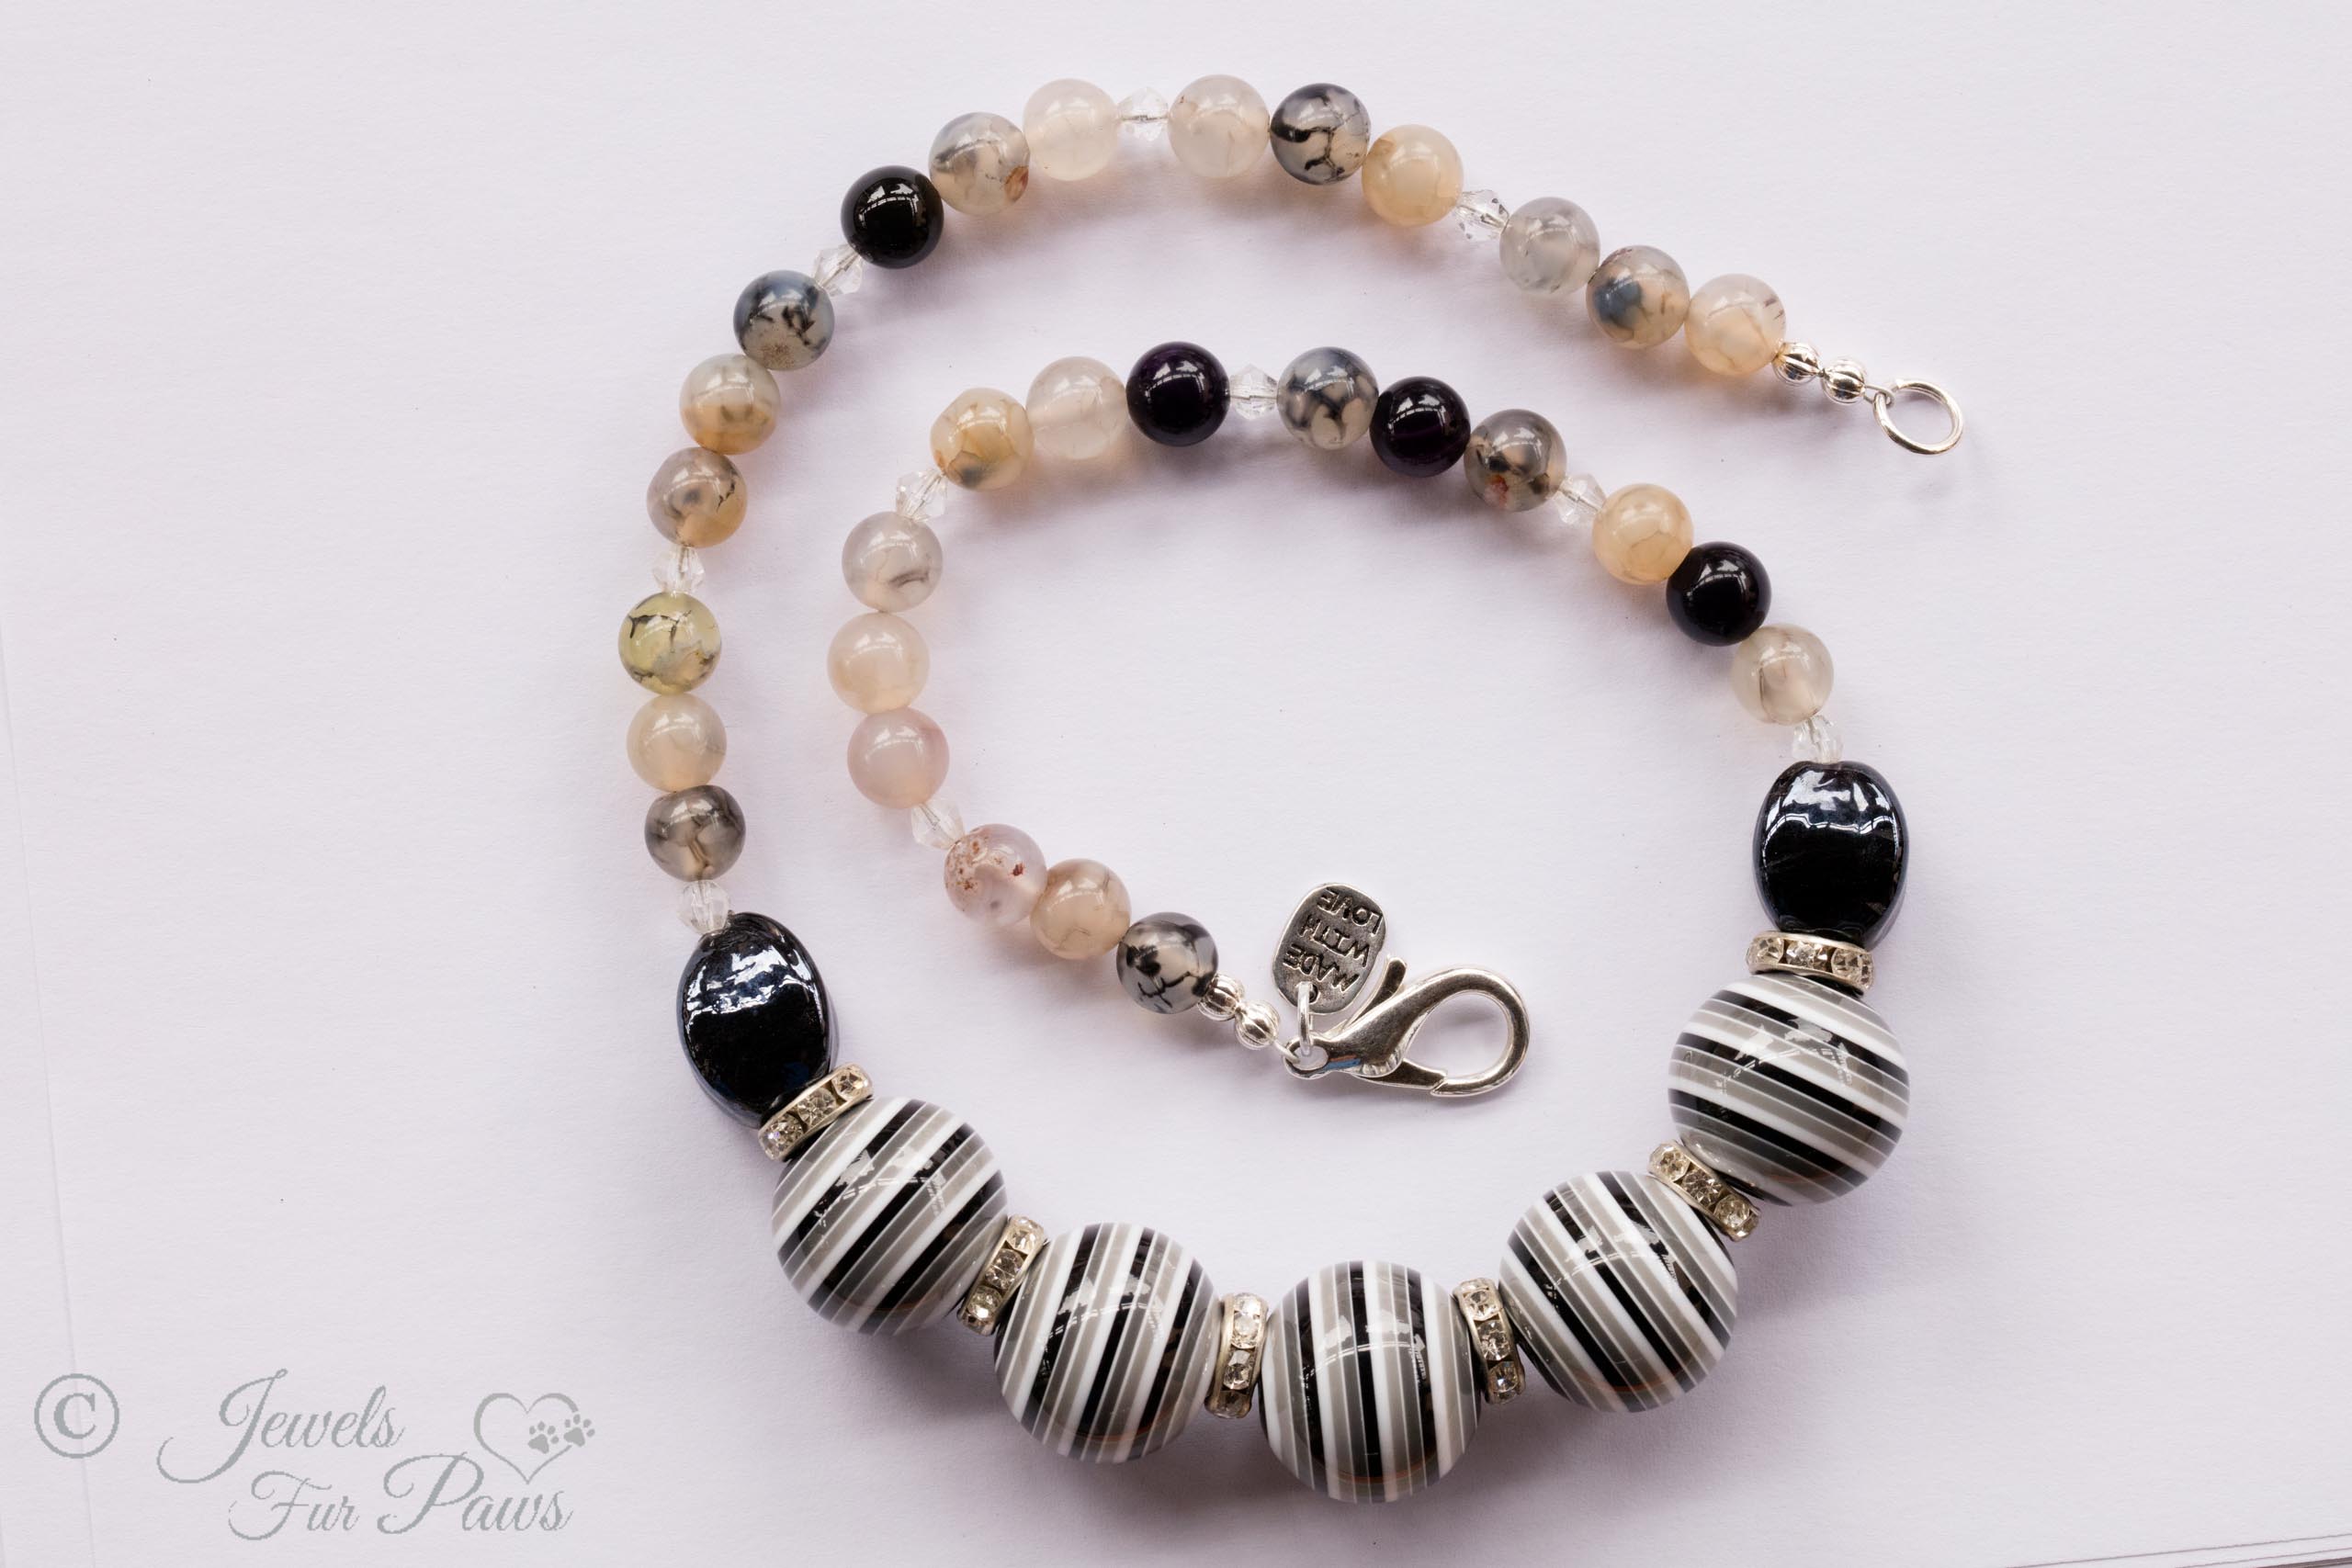 black and white striped round beads strung with oval black crystals and marbleized white glass beads on white background